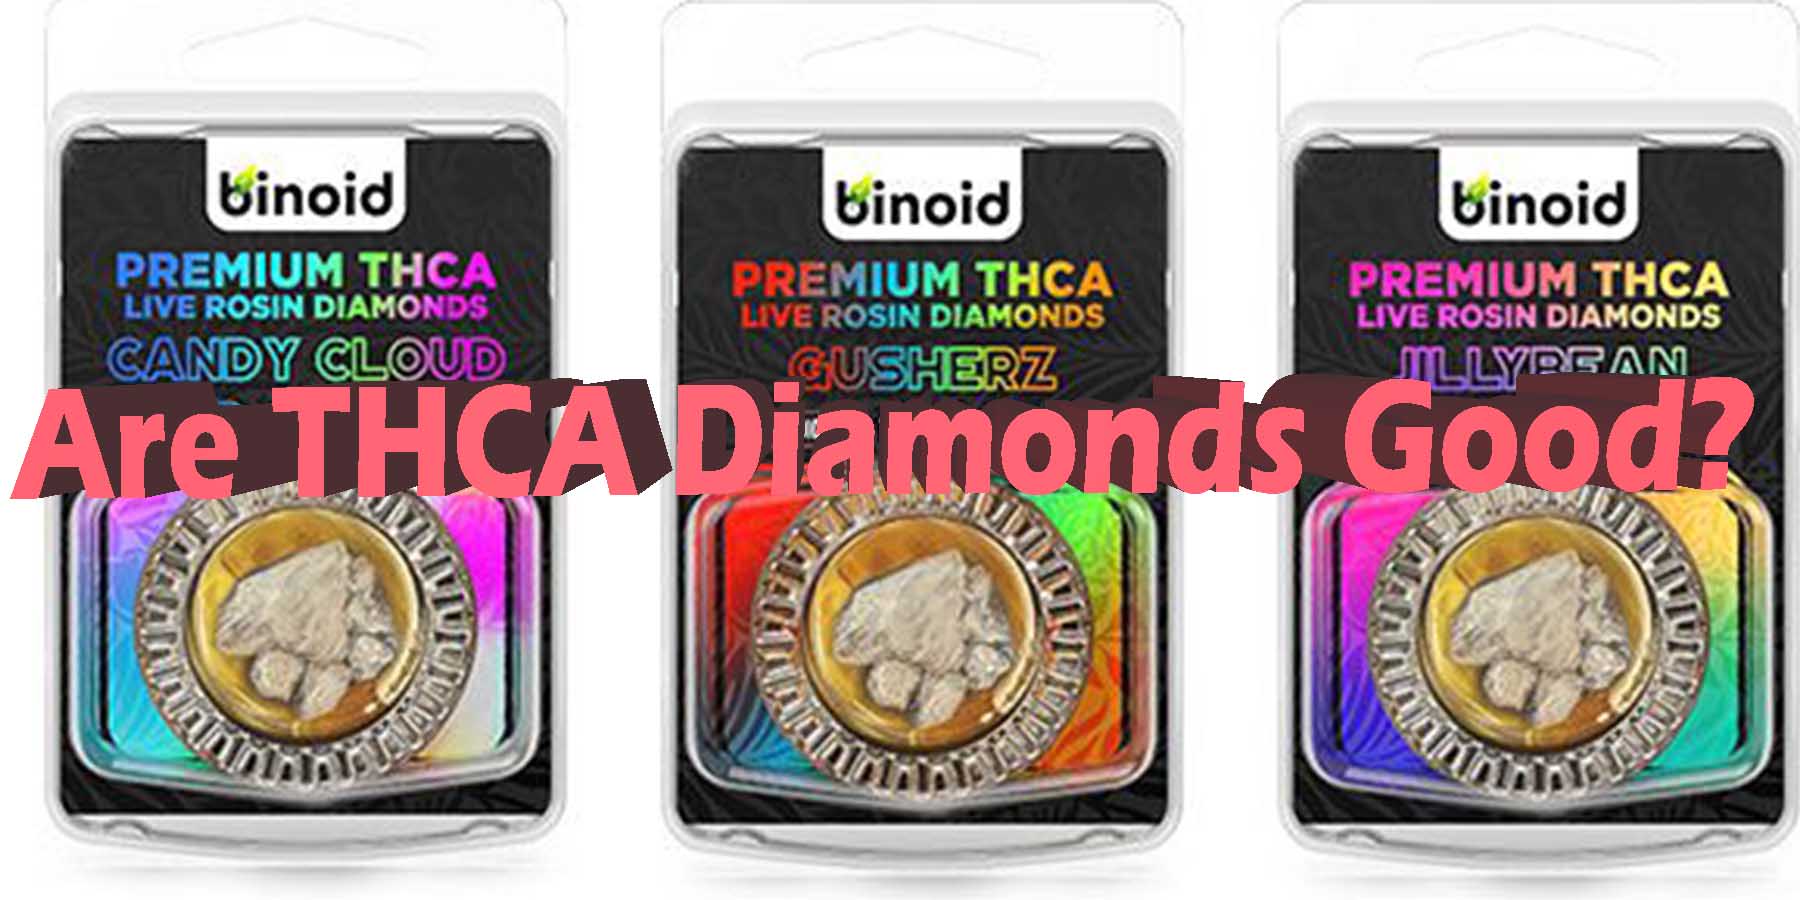 Are THCA Diamonds Good WhereToGet HowToGetNearMe BestPlace LowestPrice Coupon Discount For Smoking Best High Smoke Shop Online Near Me StrongestBrand BestBrand Binoid Bloomz.